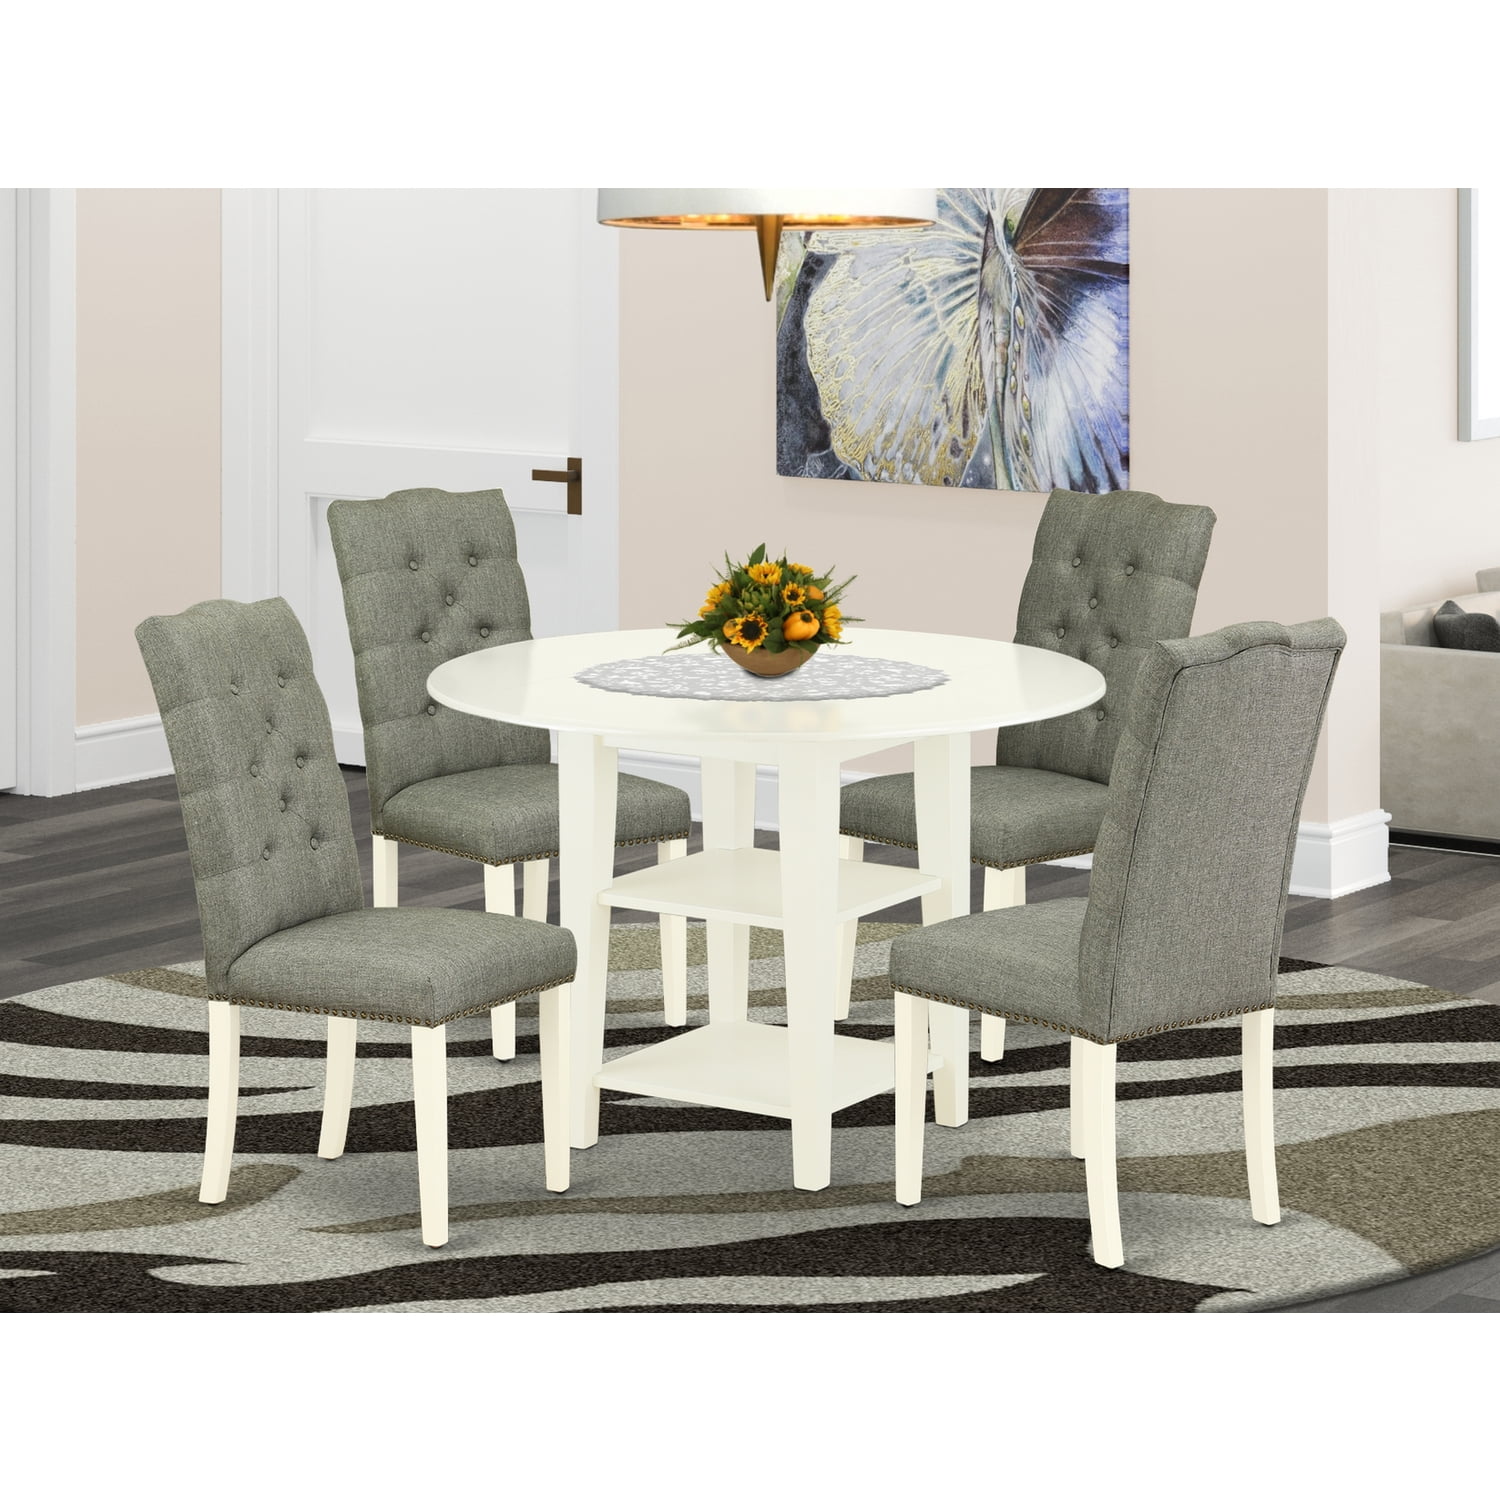 Small Round Table Solid Wood Frame, Round Two Person Chair